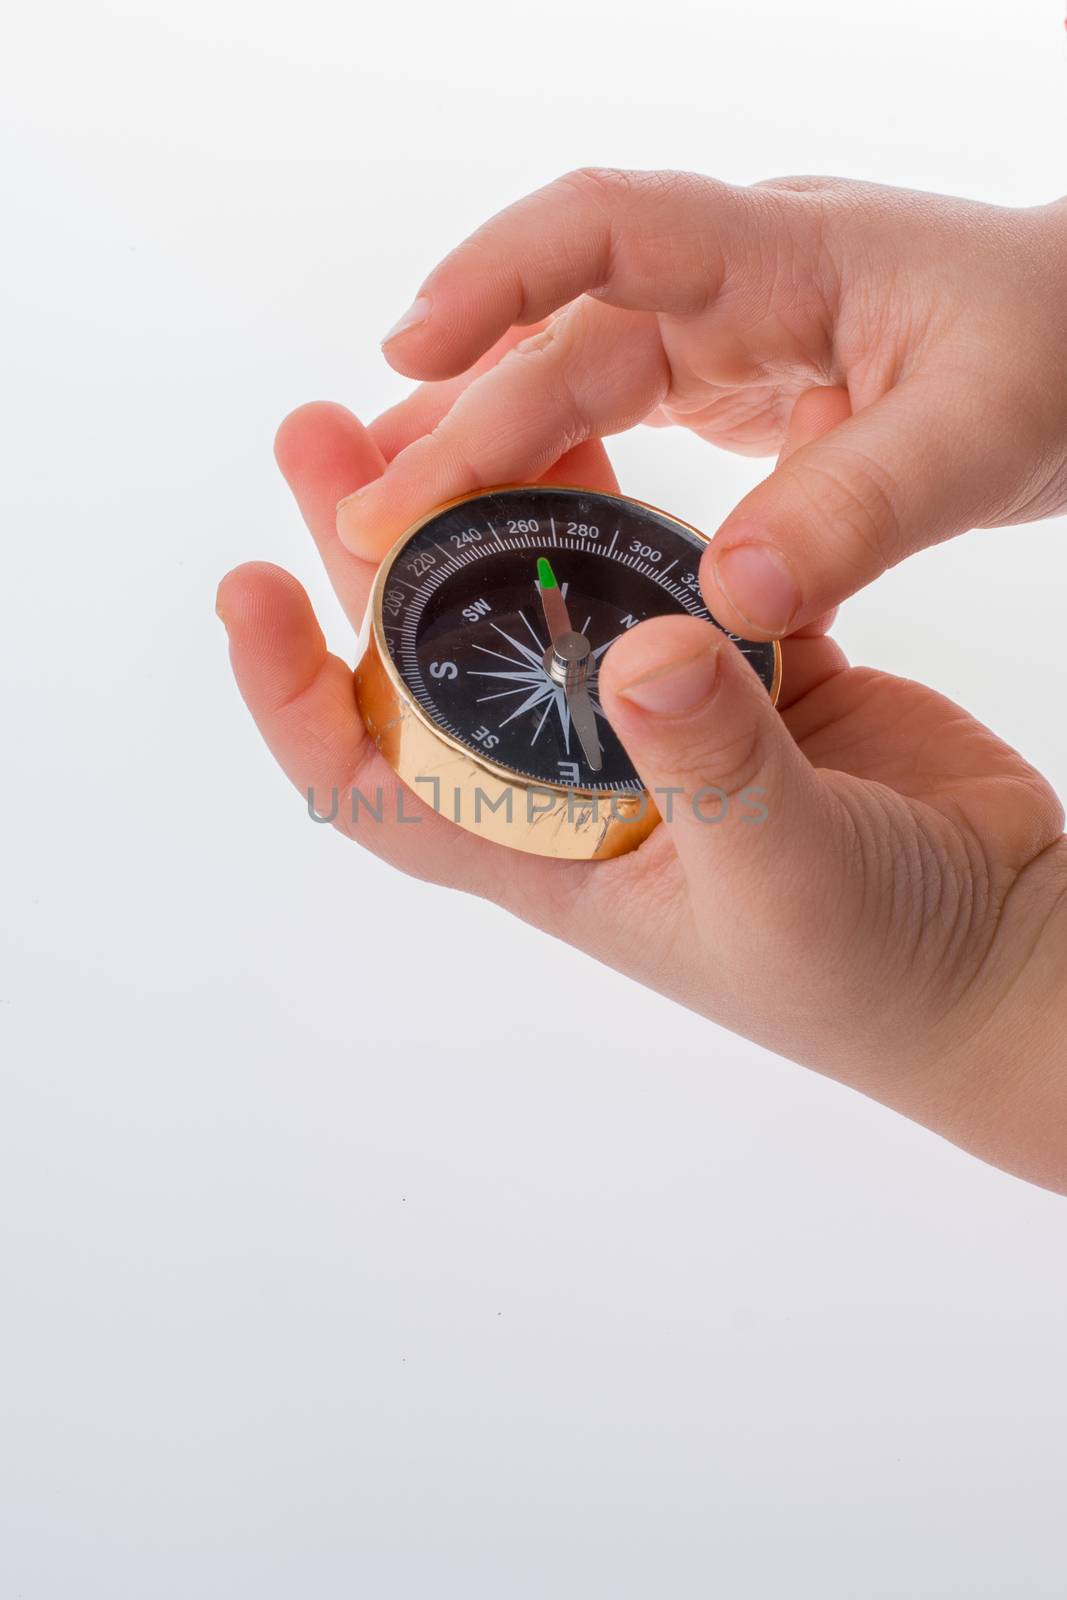 Child hand holding a compass  on a white background